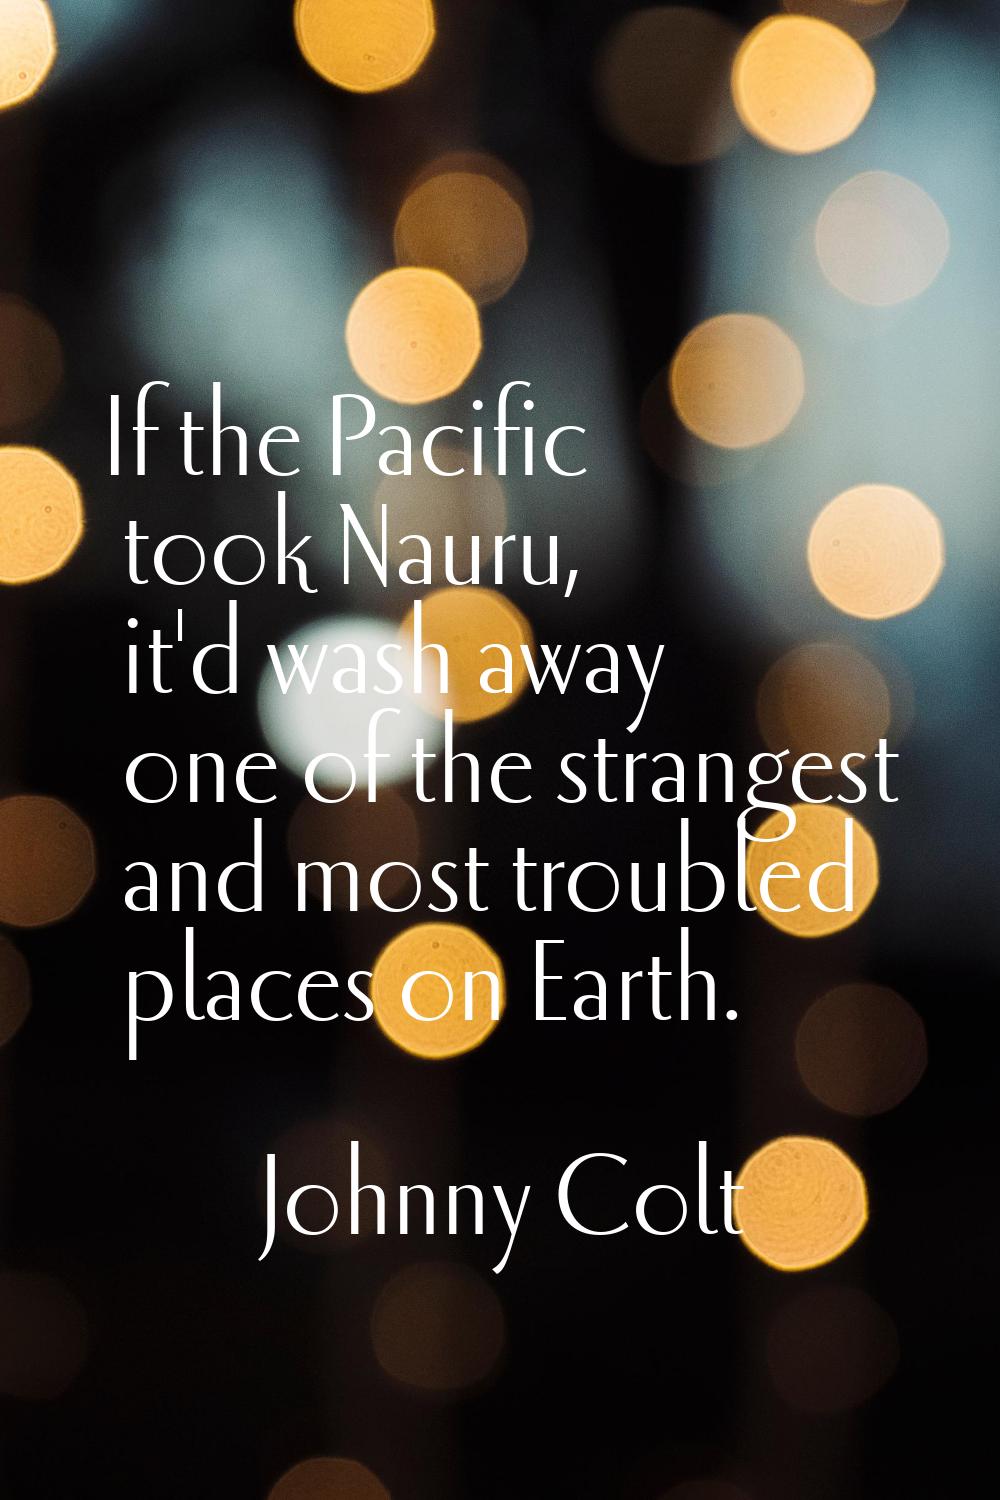 If the Pacific took Nauru, it'd wash away one of the strangest and most troubled places on Earth.